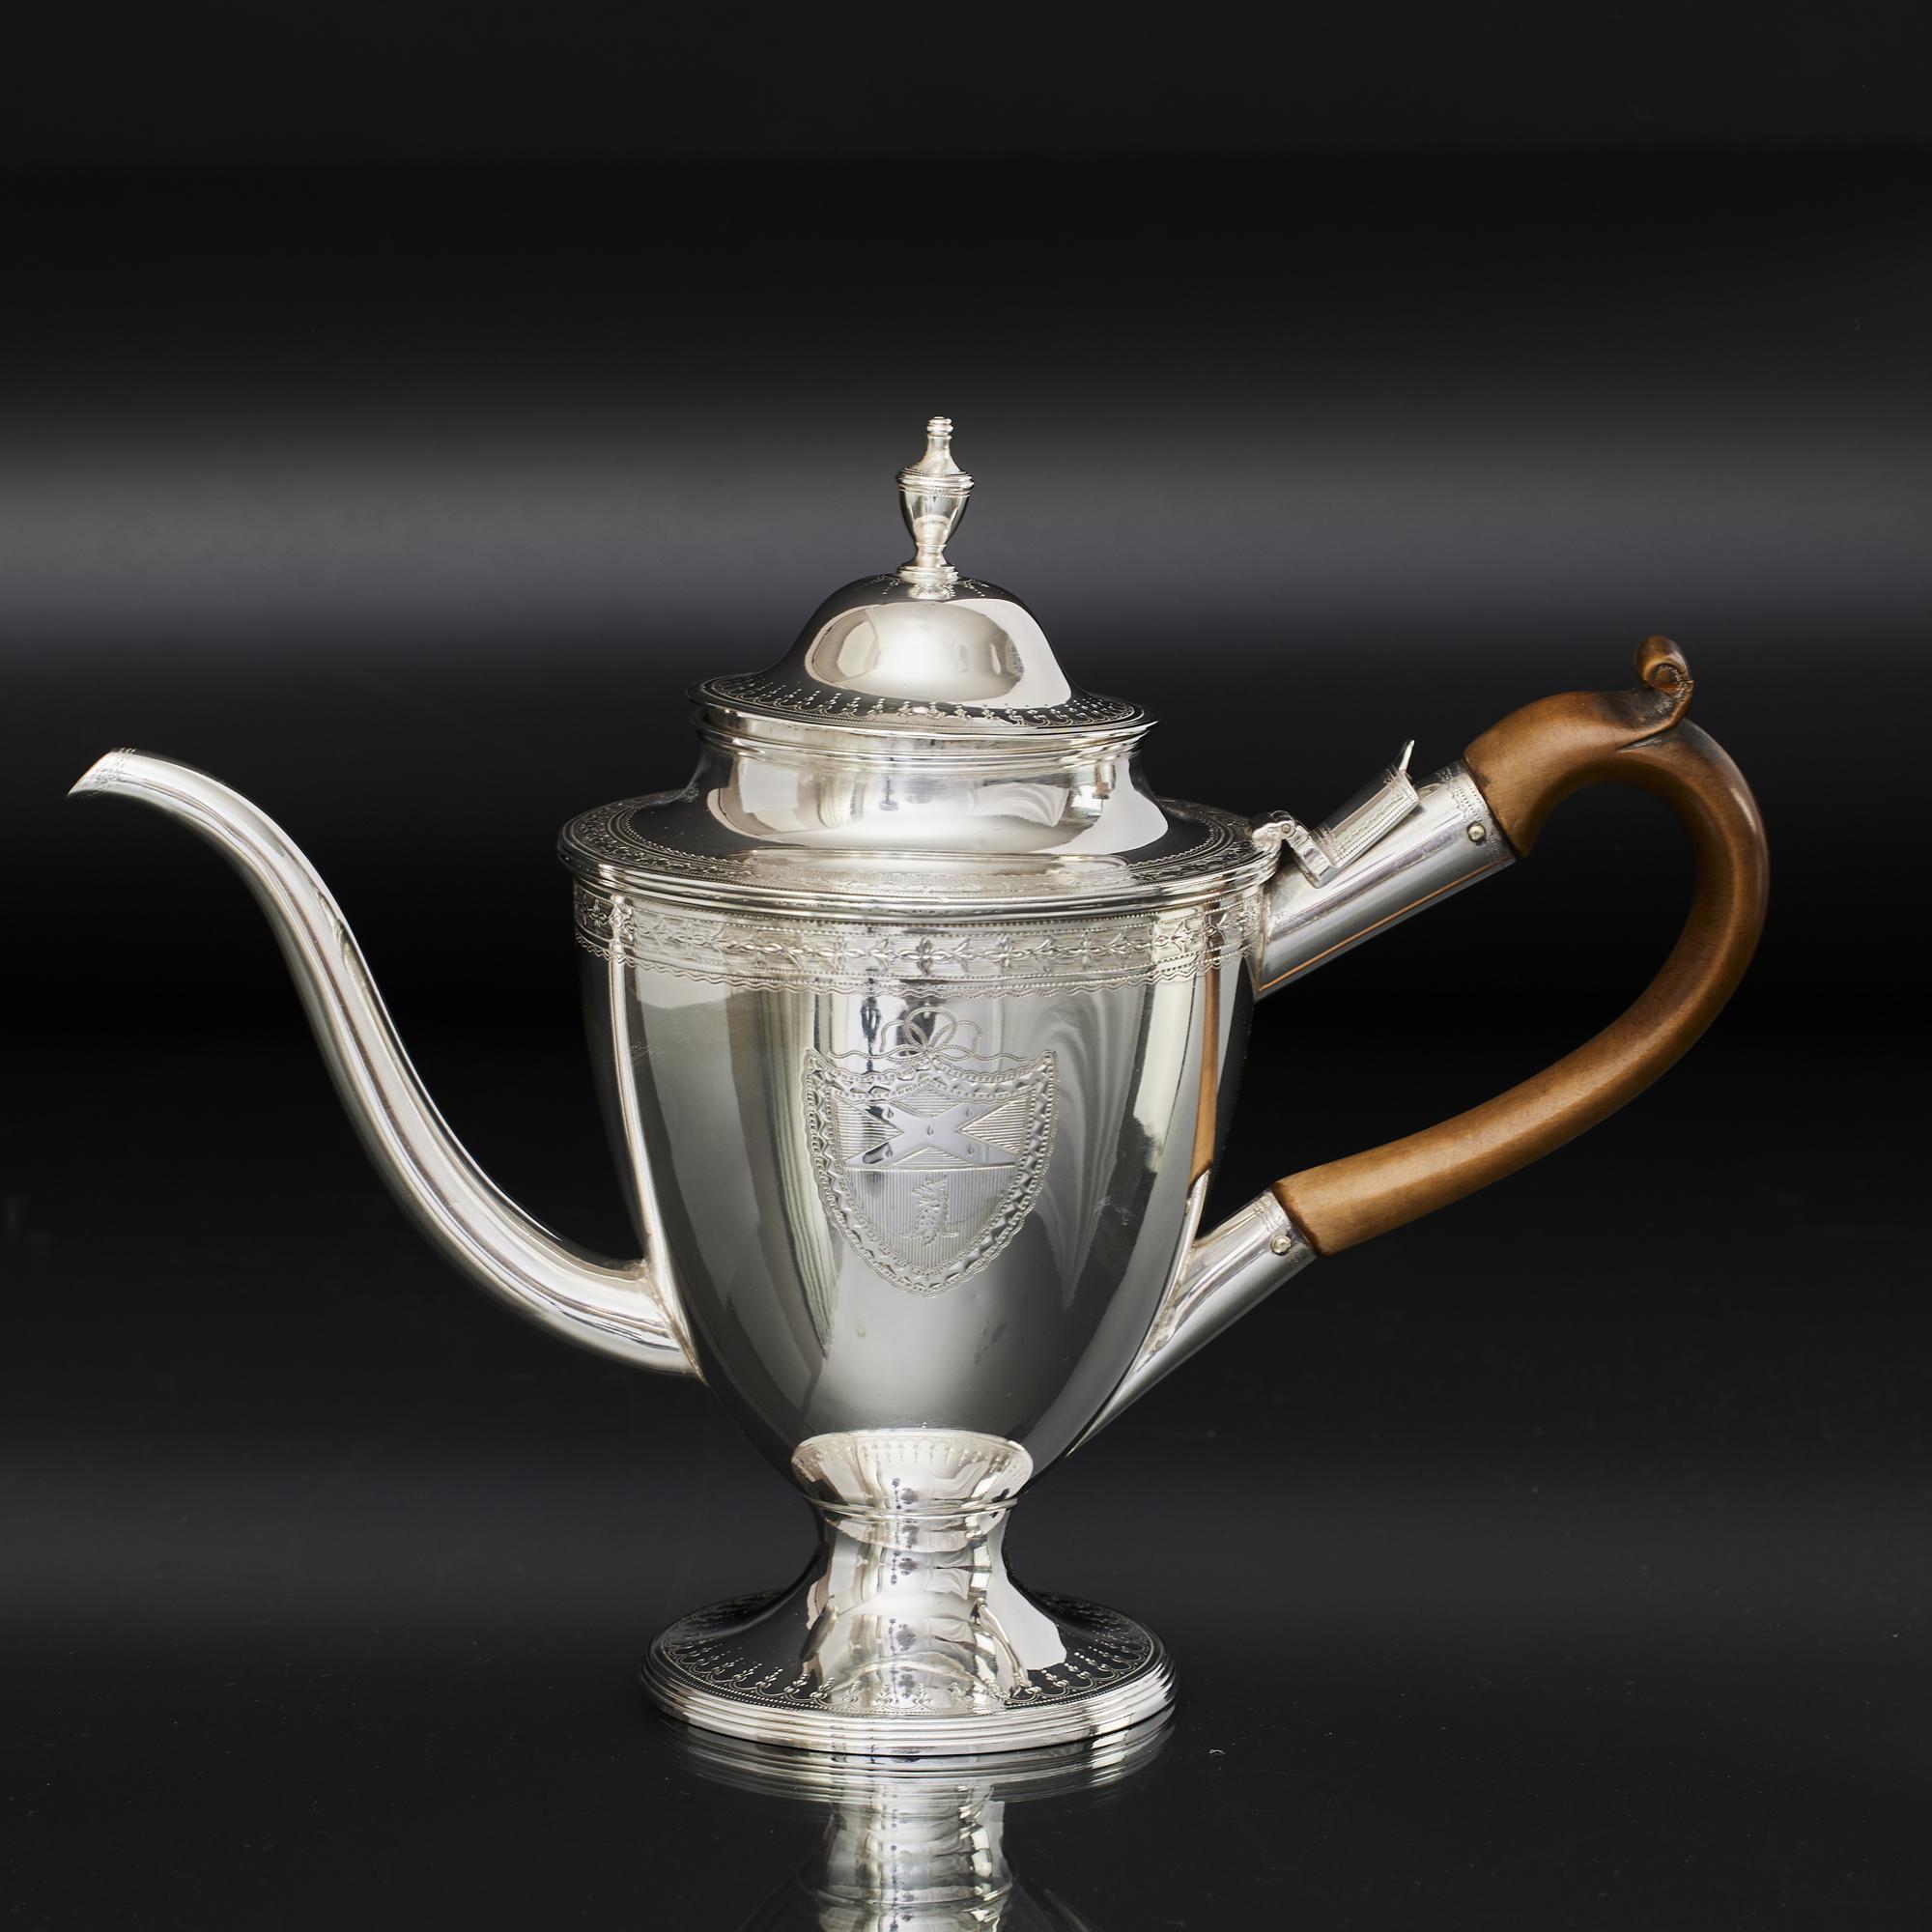 A fine antique silver argyle, or argyll; a lidded gravy jug that features a hot water jacket that is filled with boiling water thus keeping the gravy or sauce hot. The water is poured through a lidded opening in the handle mount and fills the space